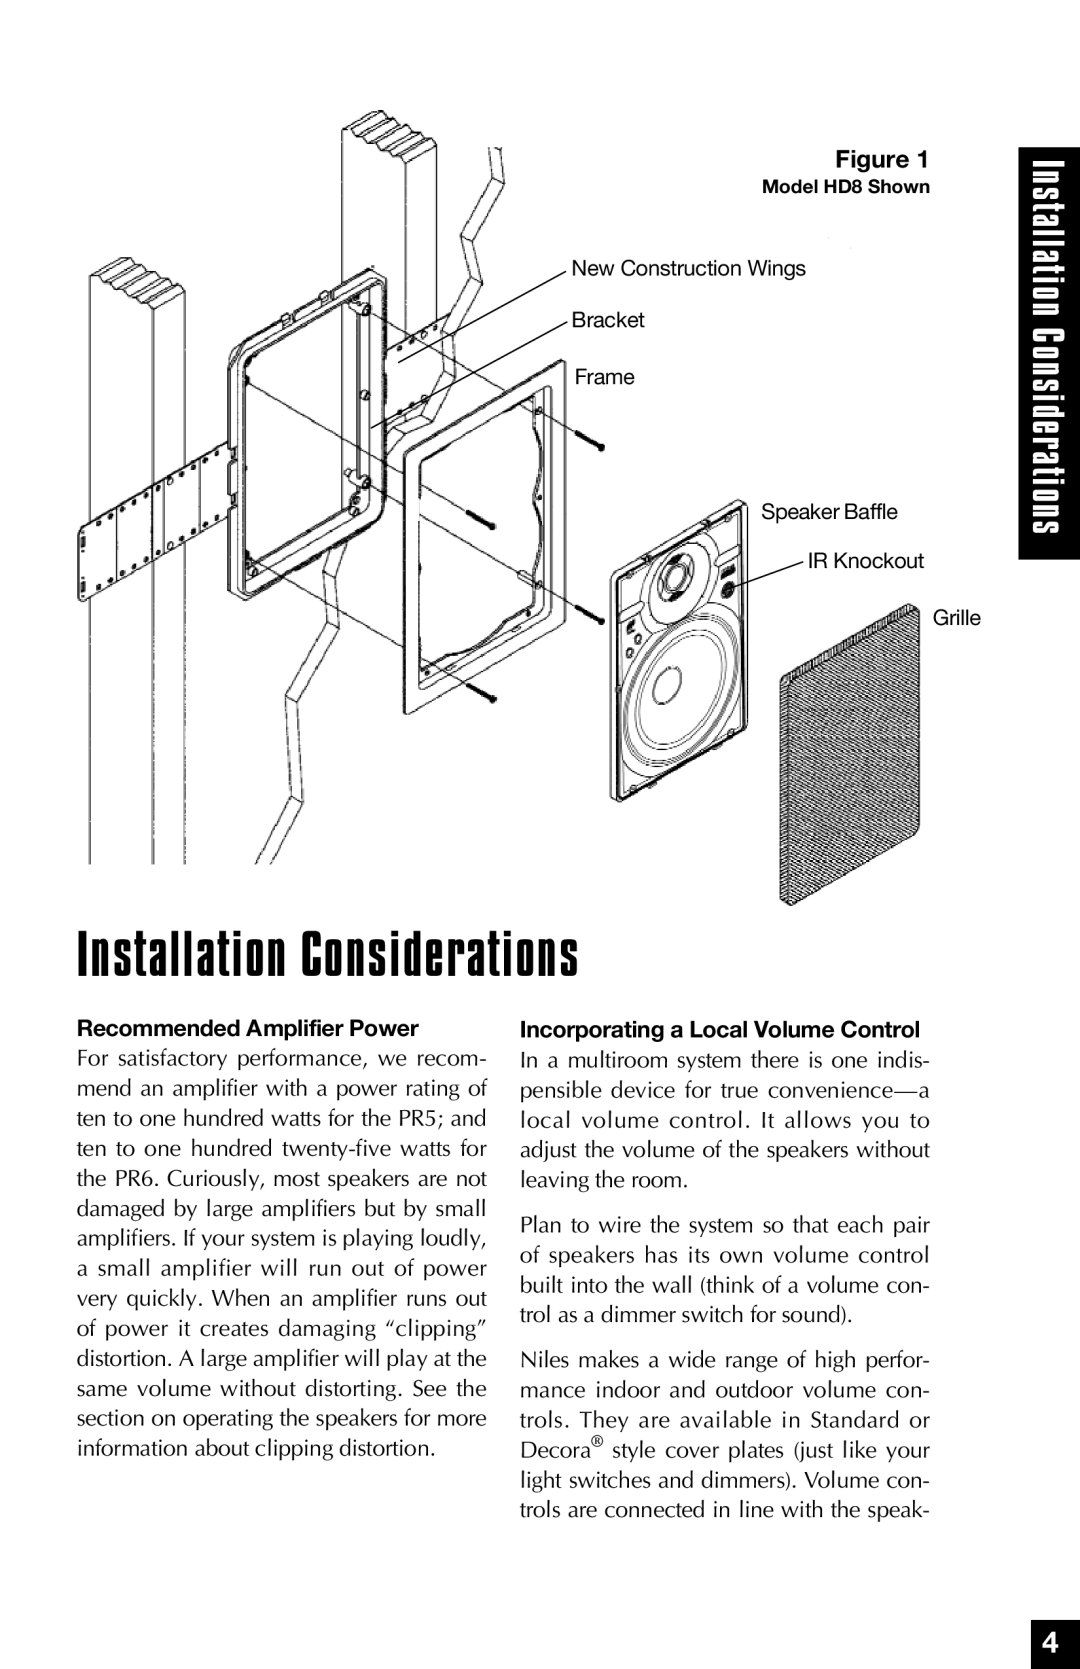 Niles Audio PR5, PR6 manual Installation Considerations, Recommended Amplifier Power, Incorporating a Local Volume Control 